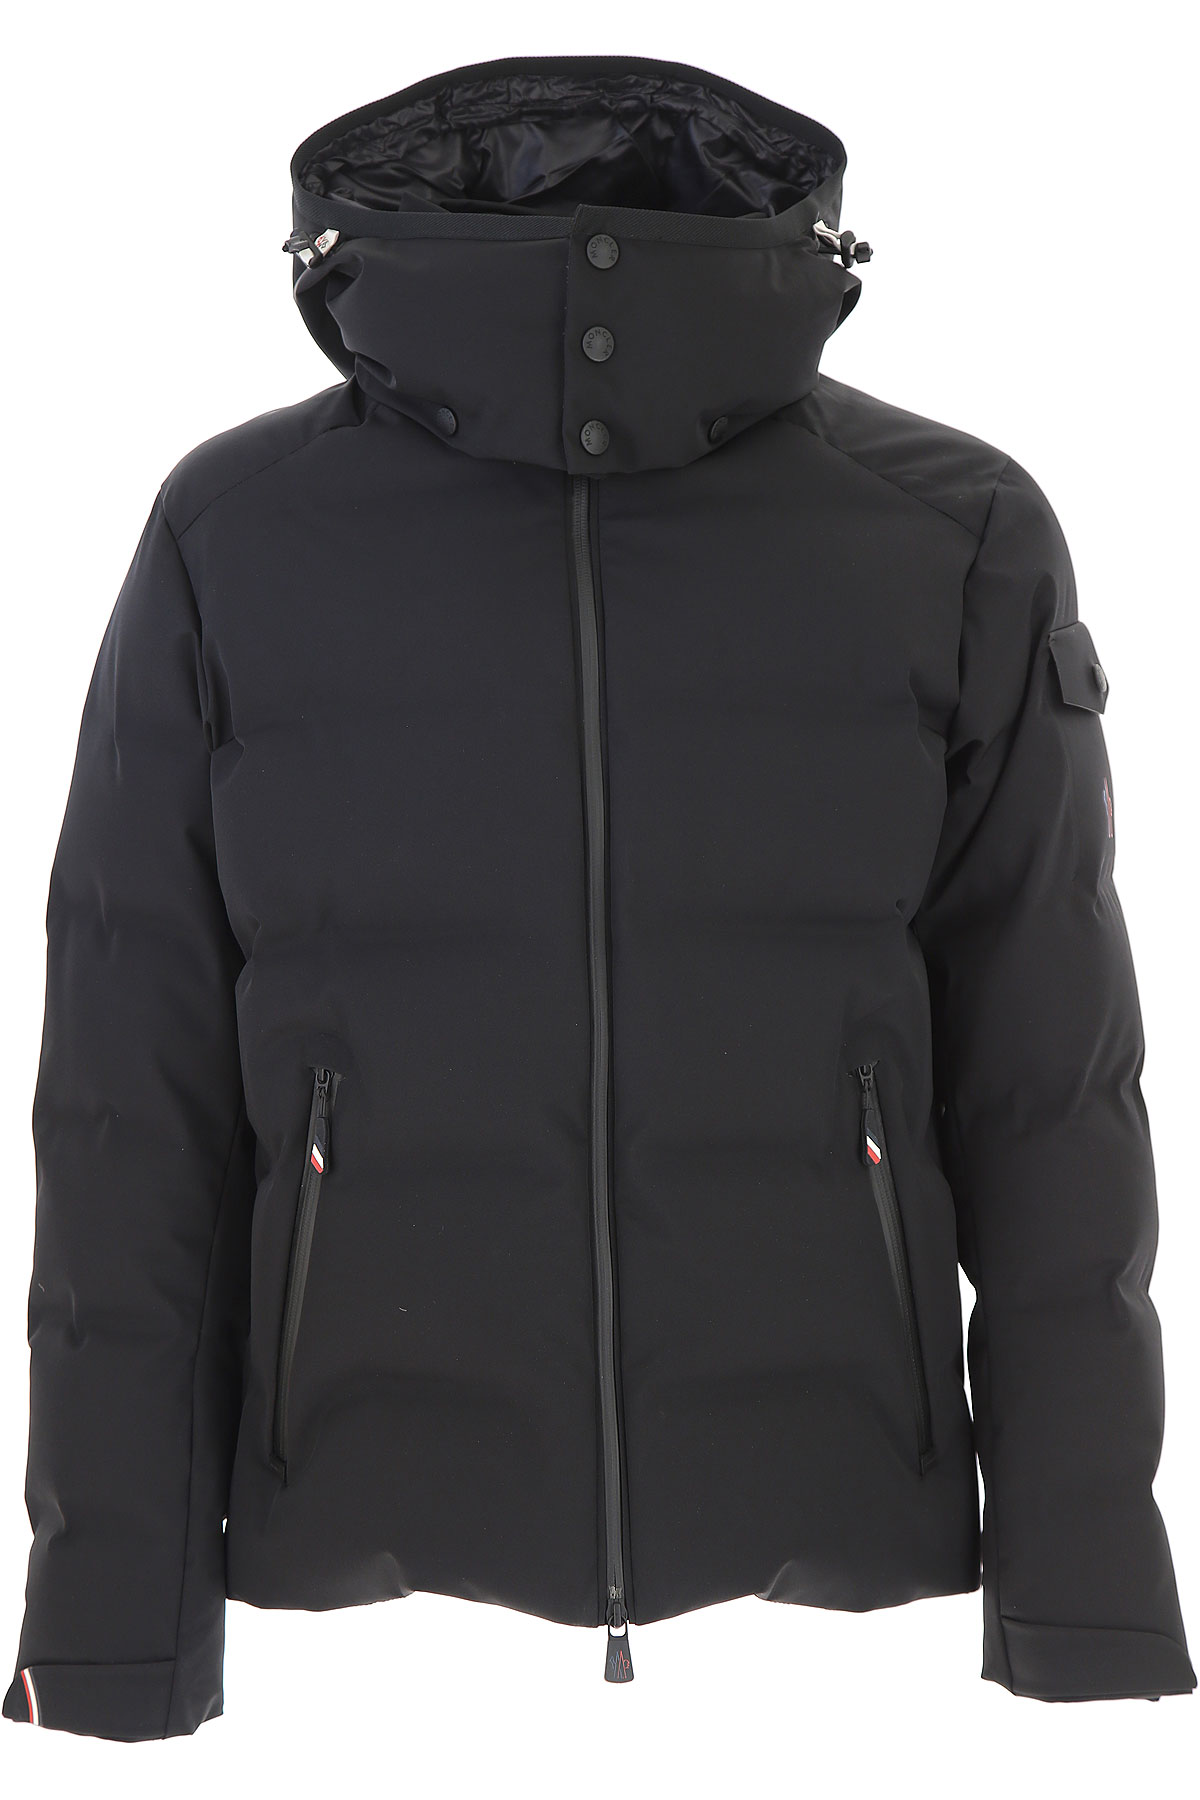 Mens Clothing Moncler, Style code: 4190830-53066-999